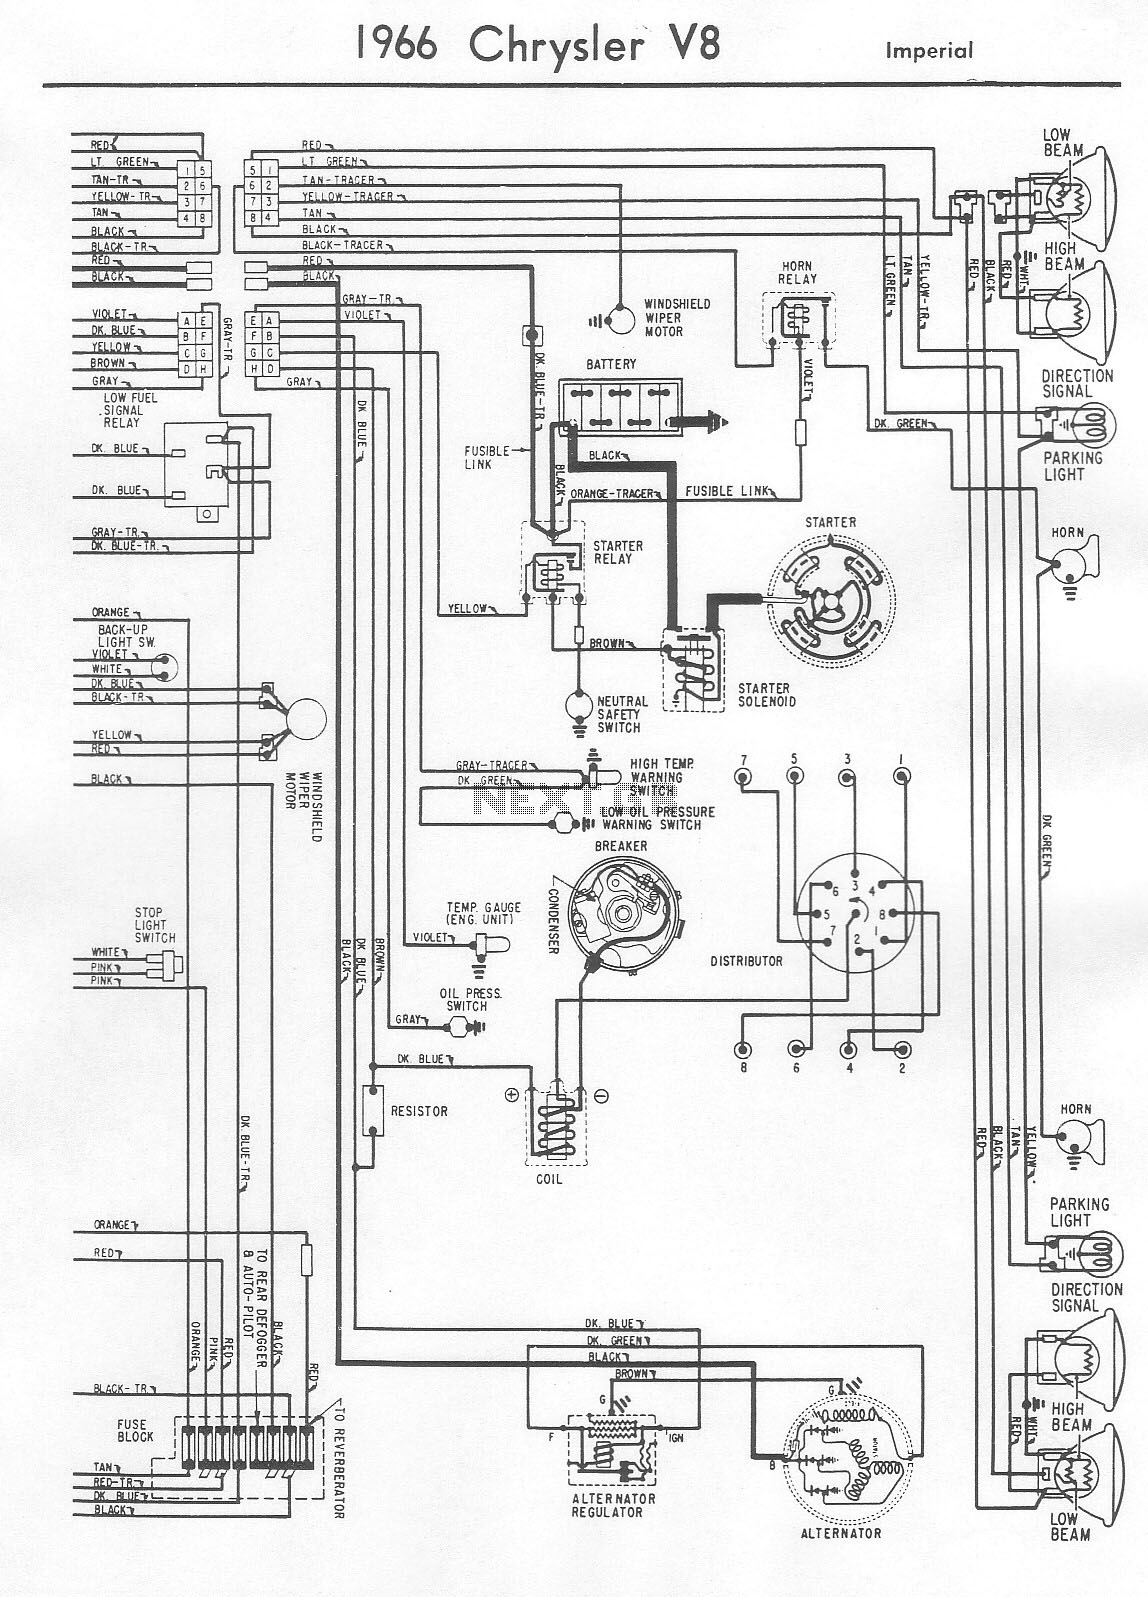 clock circuit Page 8 : Meter Counter Circuits :: Next.gr imperial range wiring diagrams 